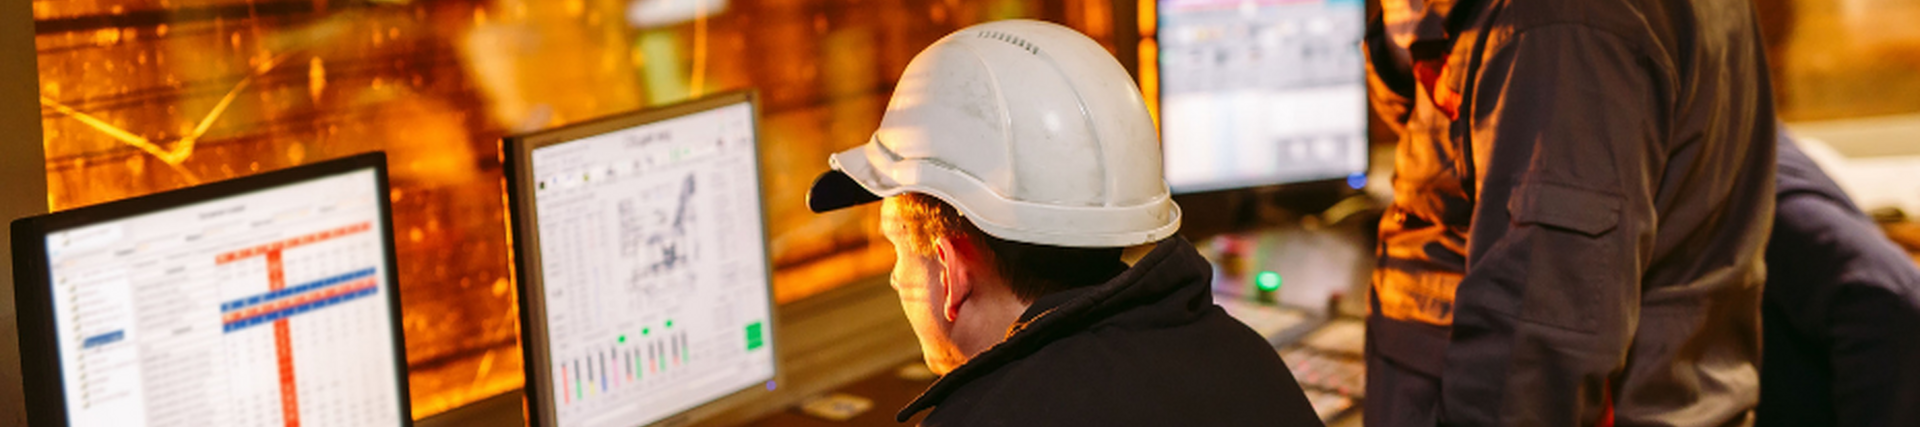 Engineers in hard hats looking at data on computer screens